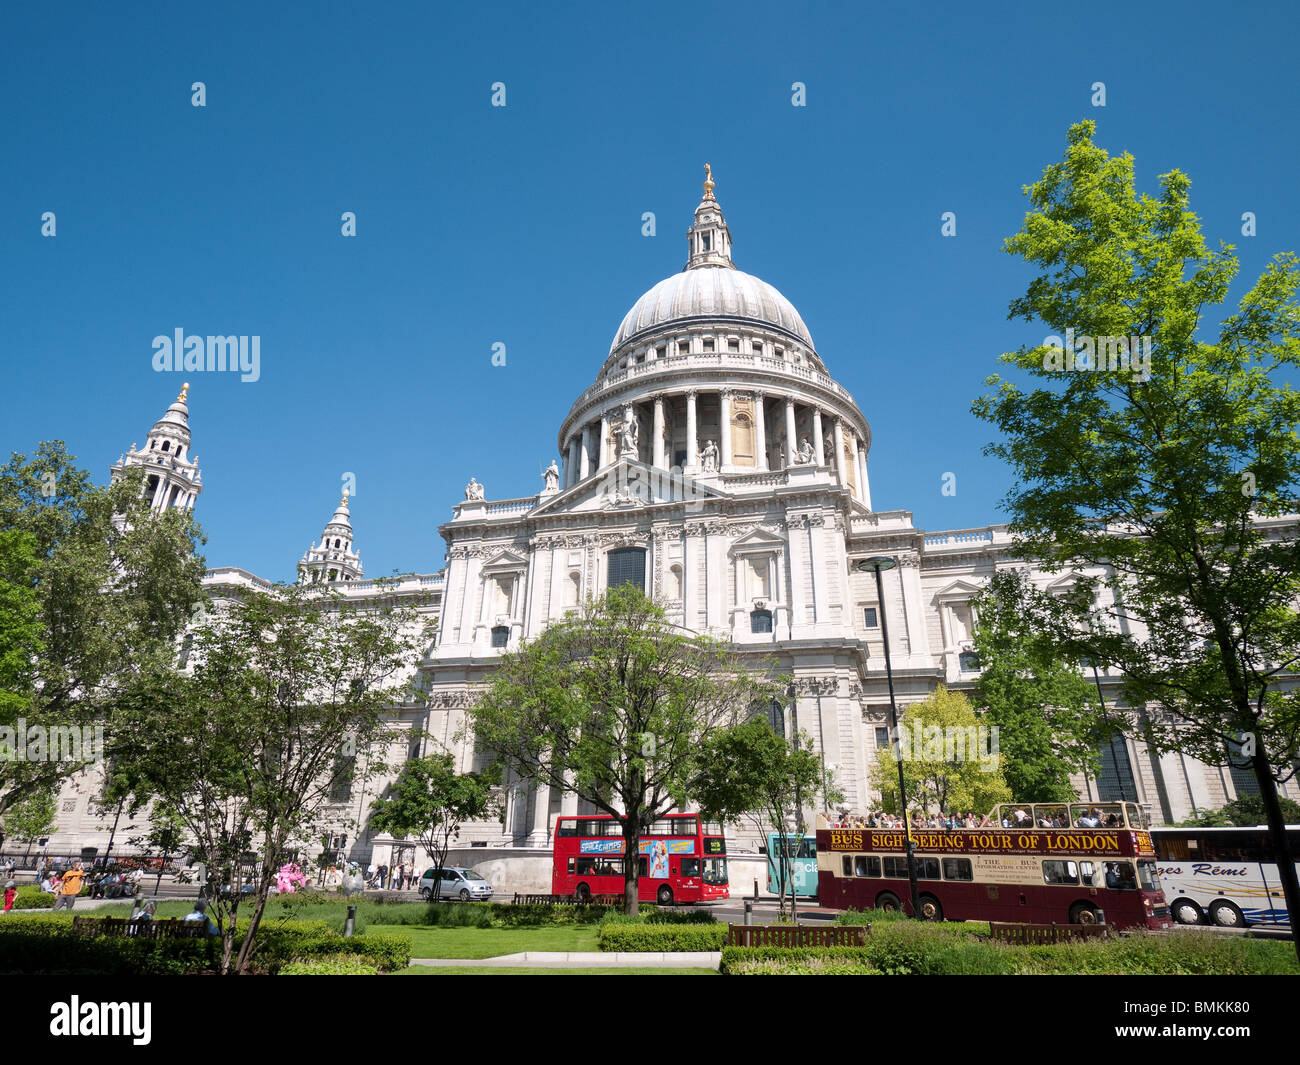 St Pauls Cathedral, London, England Stockfoto